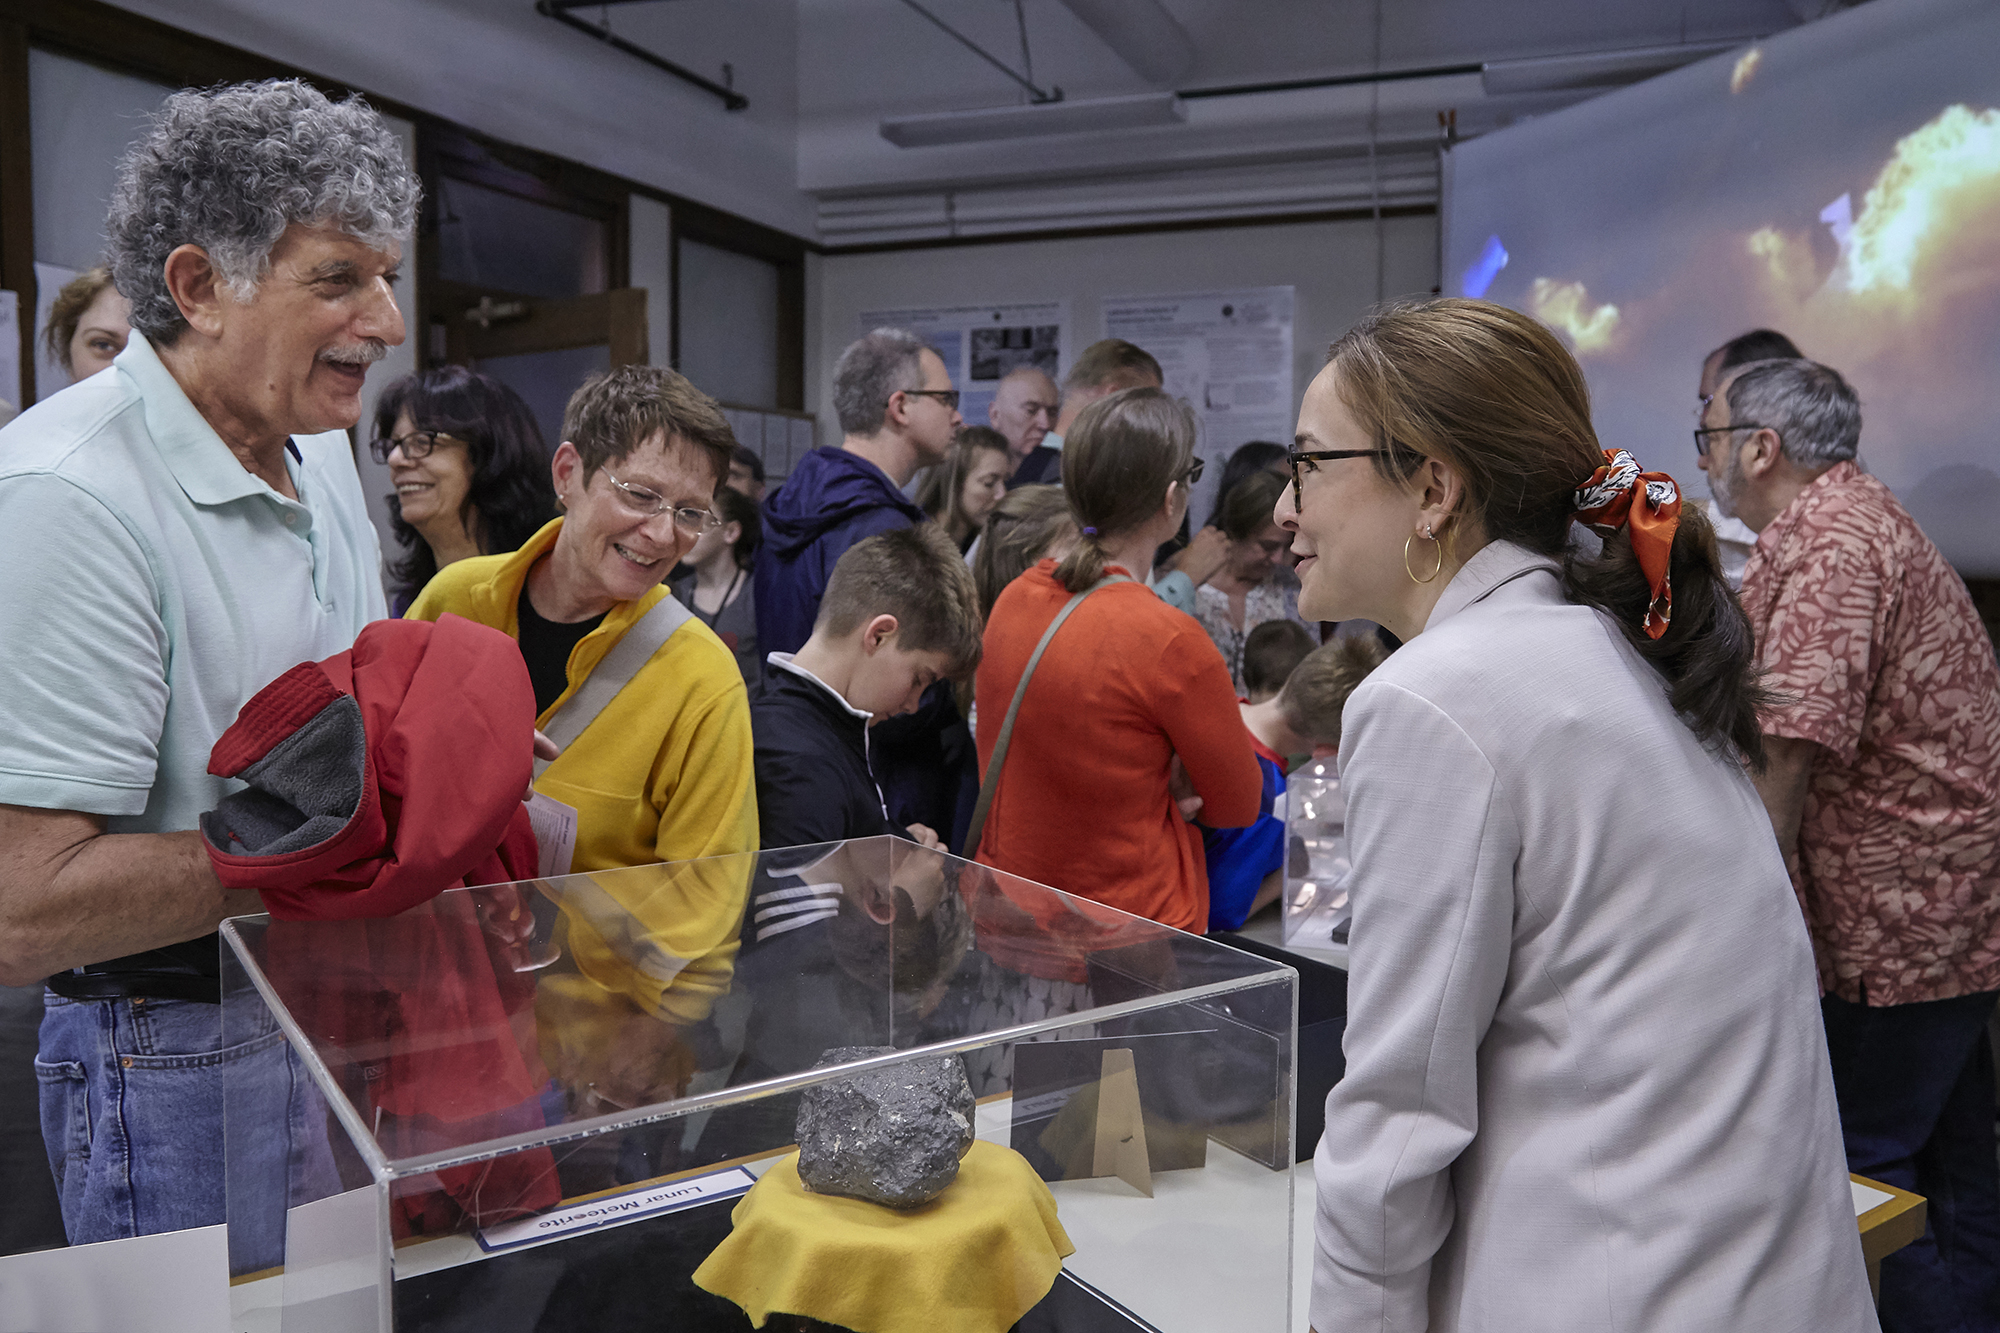 A scientist presents a meteorite to a crowd of people. She stands behind a desk with the meteorite encased in glass. People in the background crowd around another, unseen table.